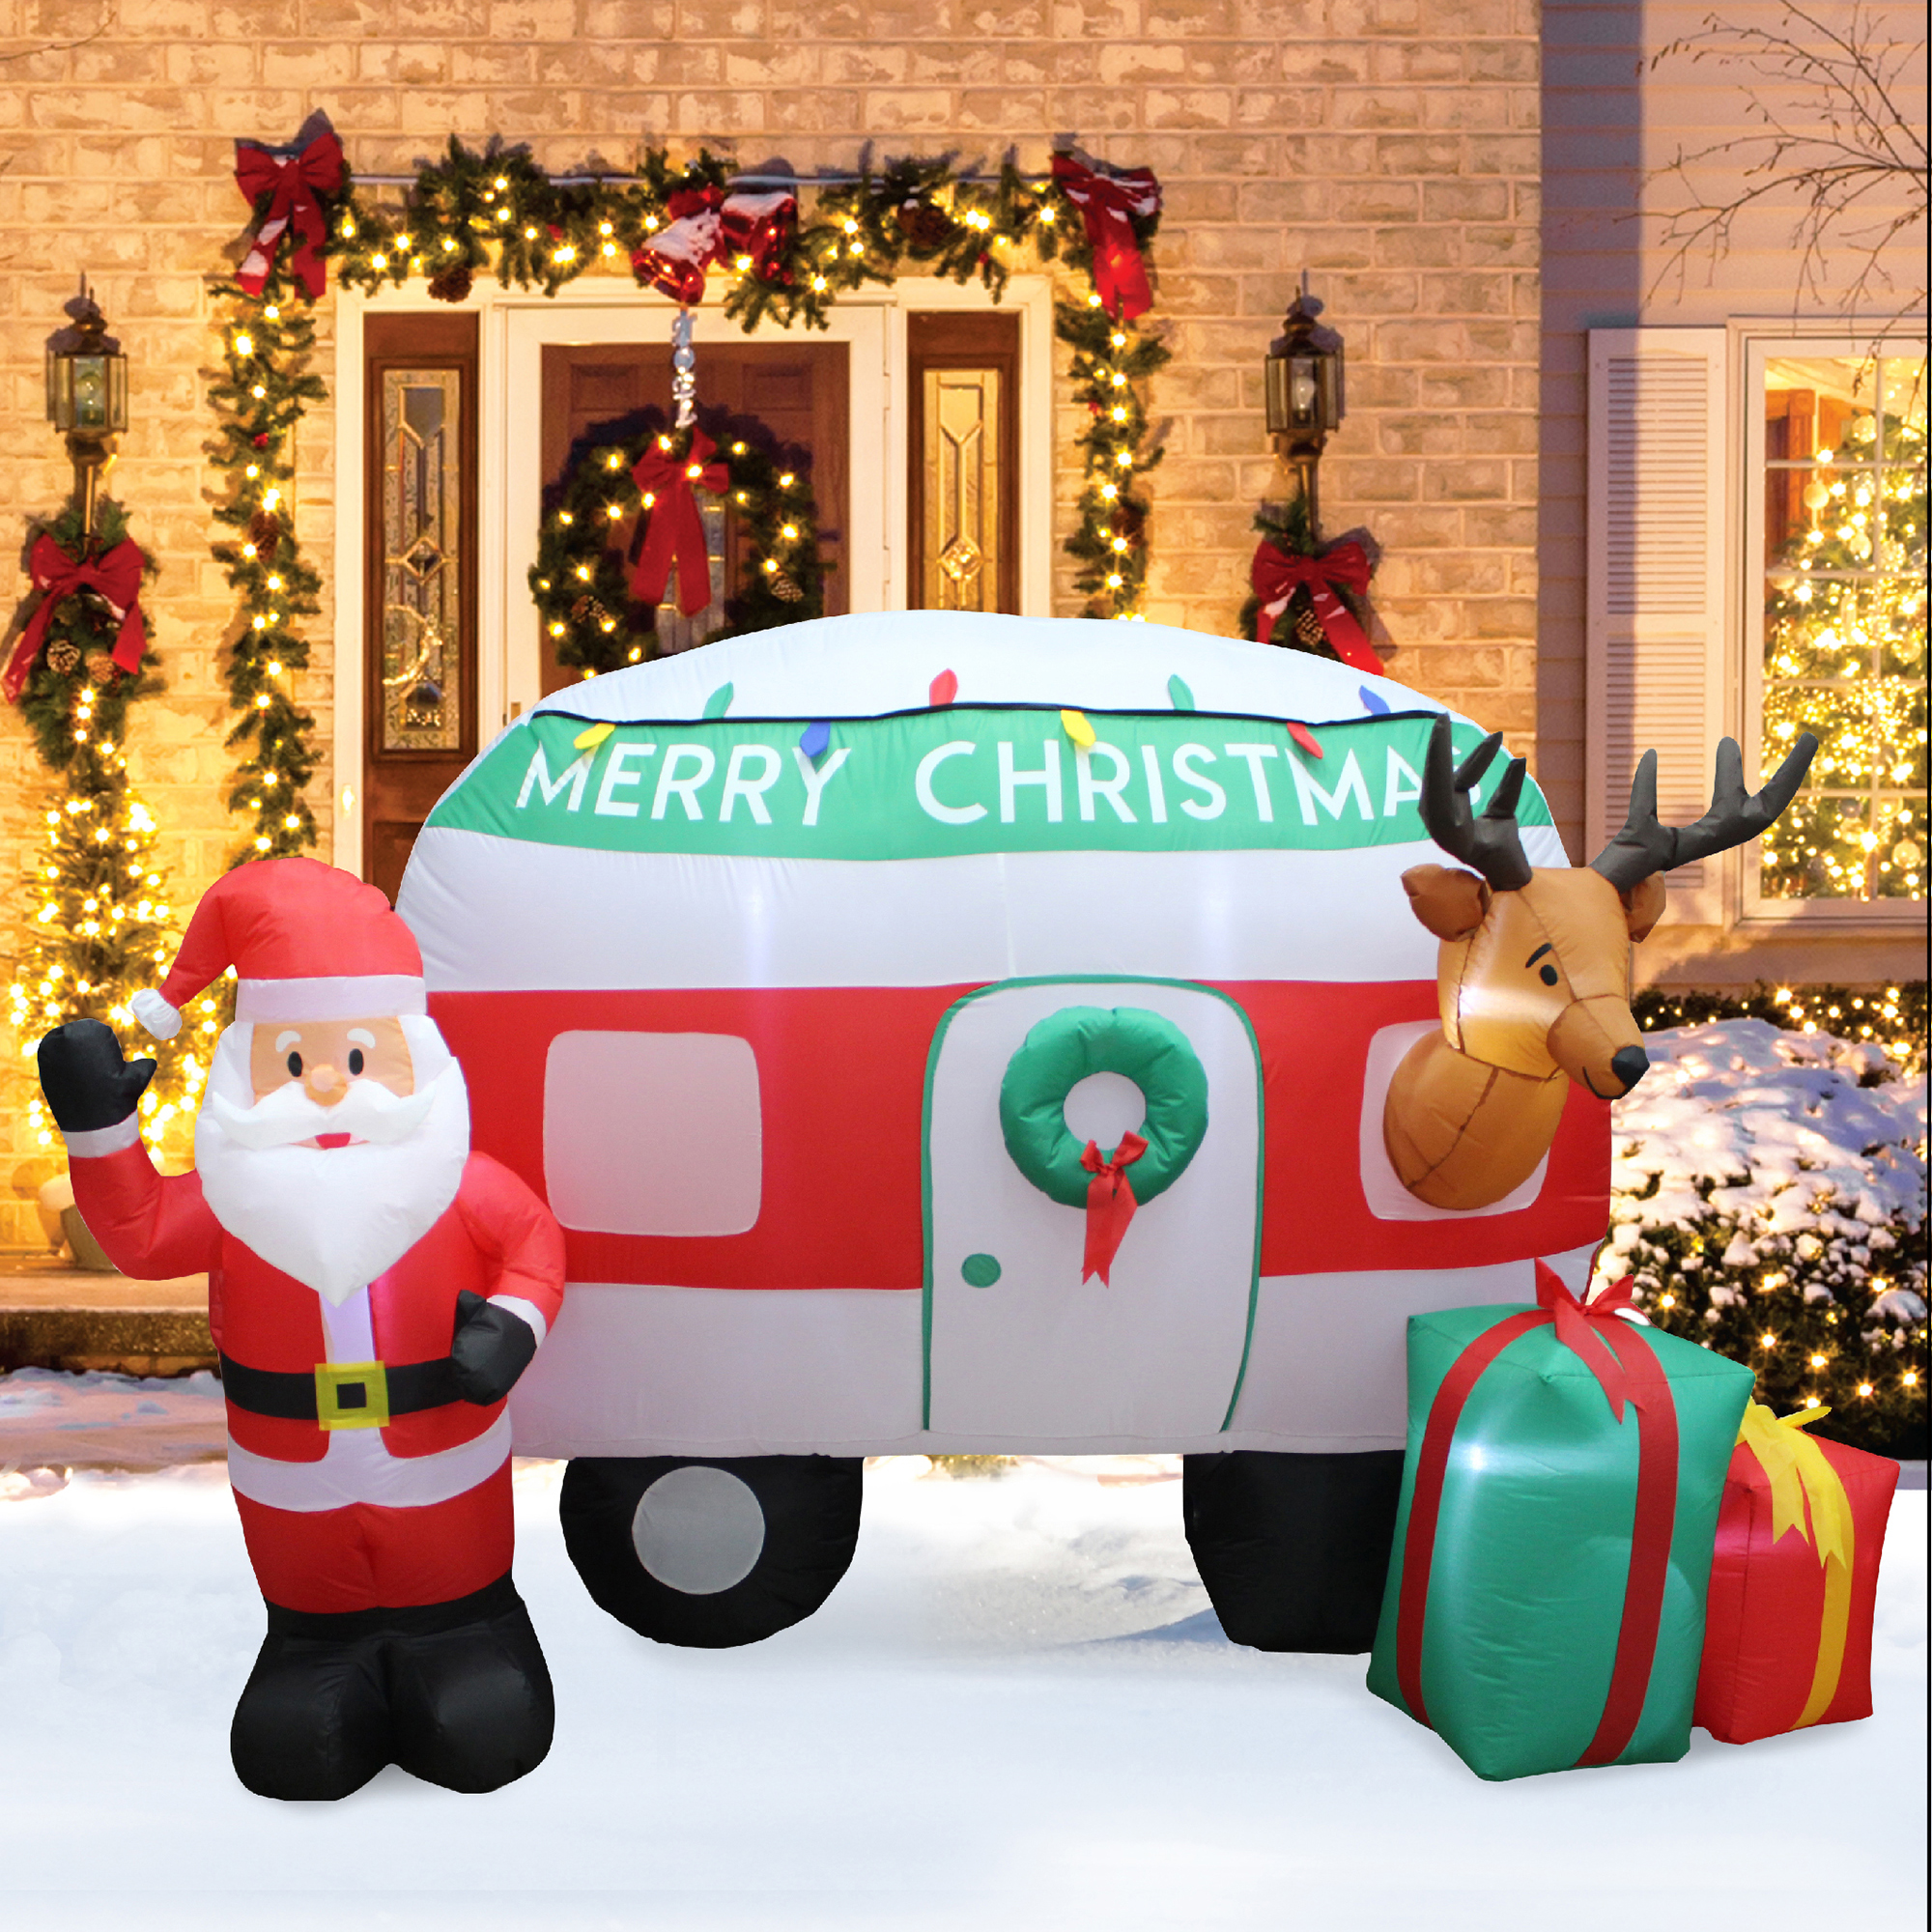 Latest Inflatable Christmas Yard Decorations Ideas in 2022